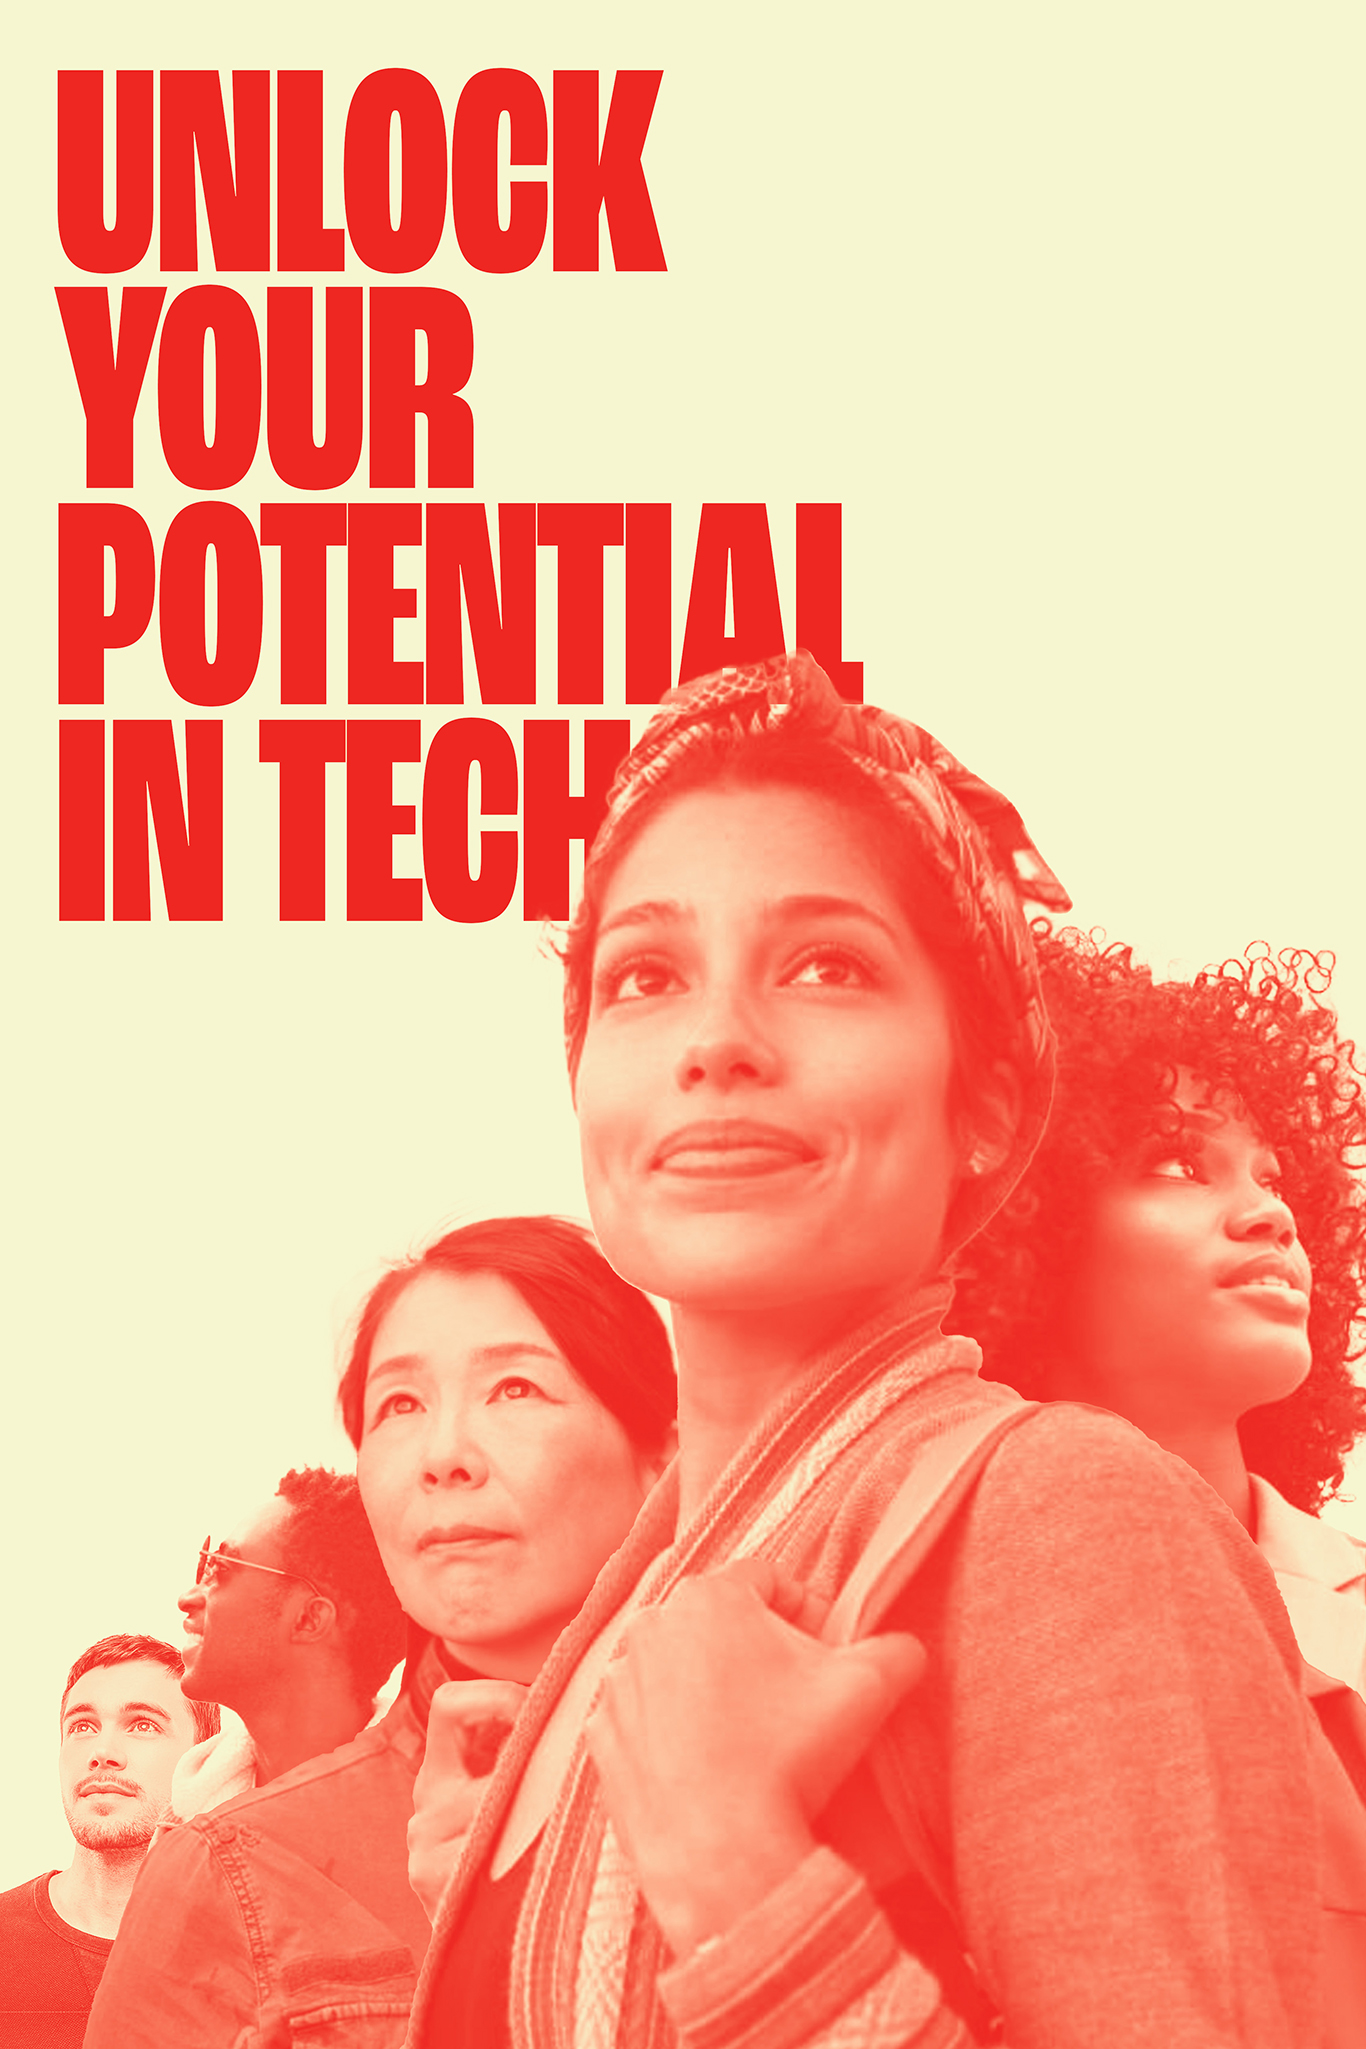 A light yellow poster with red text that reads “unlock your potential in tech” and a red cutout collage of images of multiracial people looking up.